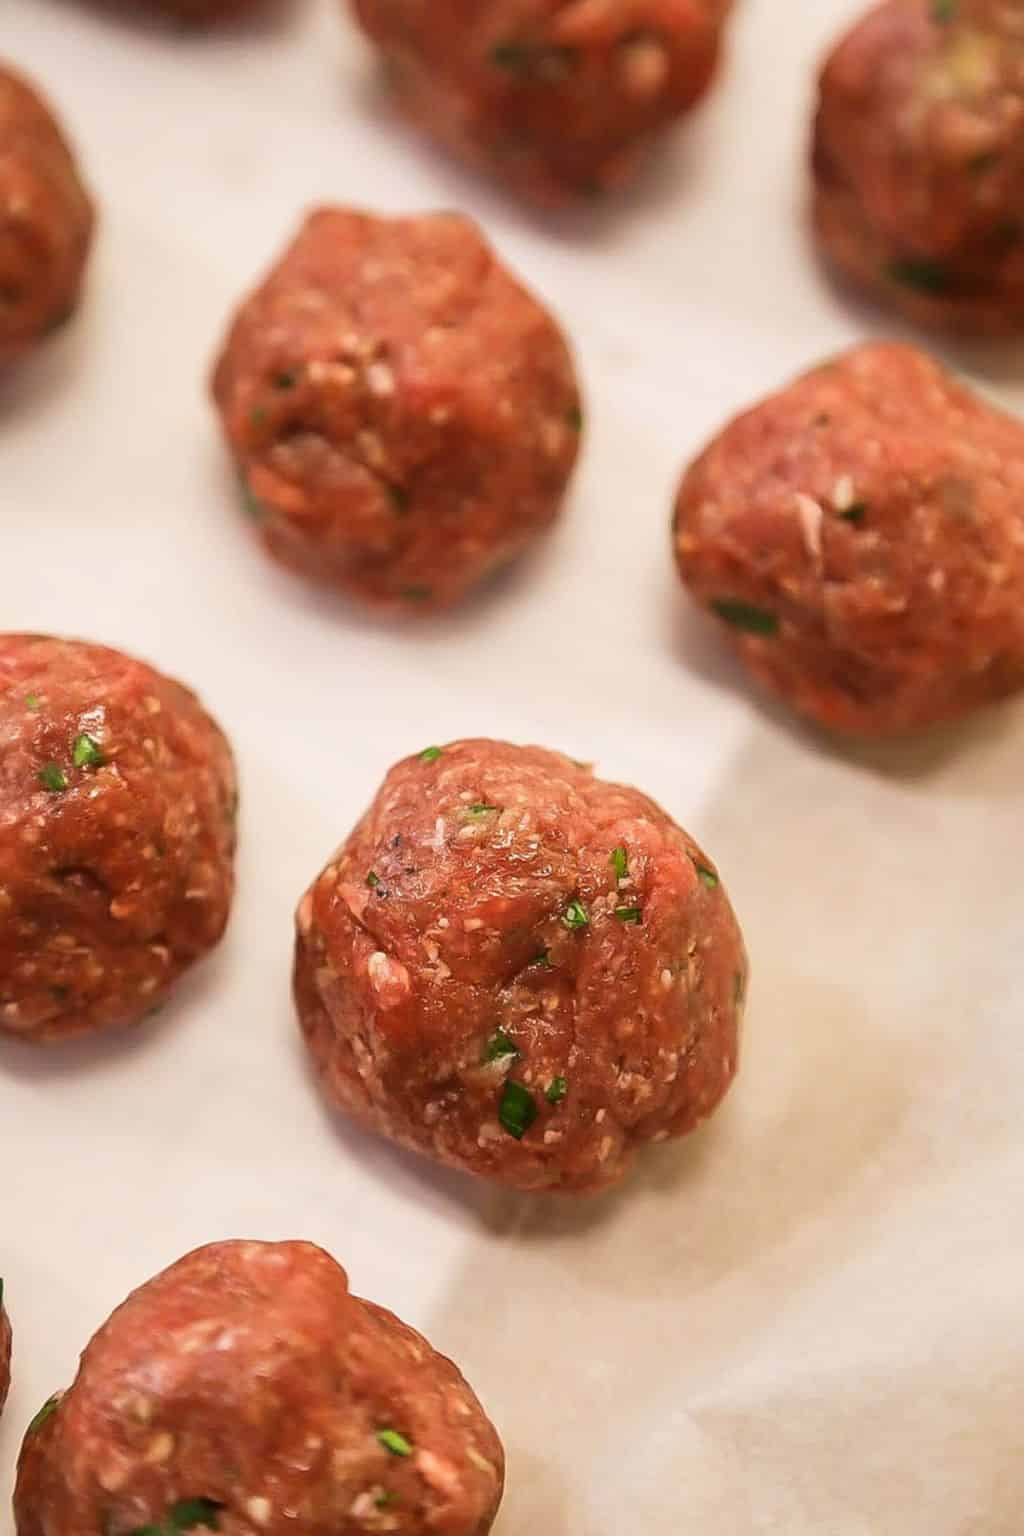 How to Make Meatballs Without Breadcrumbs (Gluten Free) - Chef Tariq